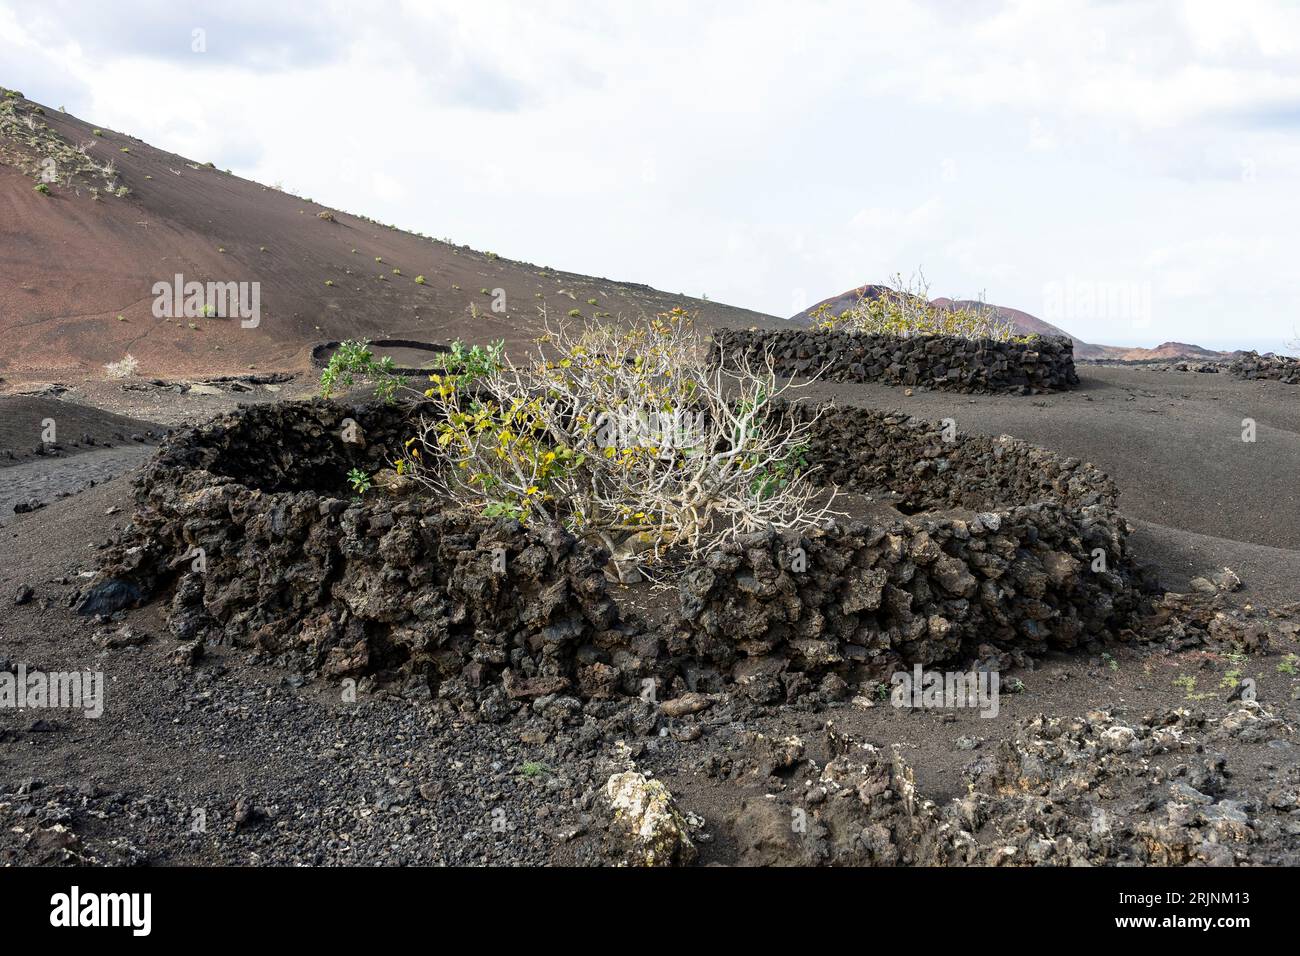 Canary Islands, Lanzarote, Timanfaya National Park: windproof dry stone wall for agricultural cultivation Stock Photo